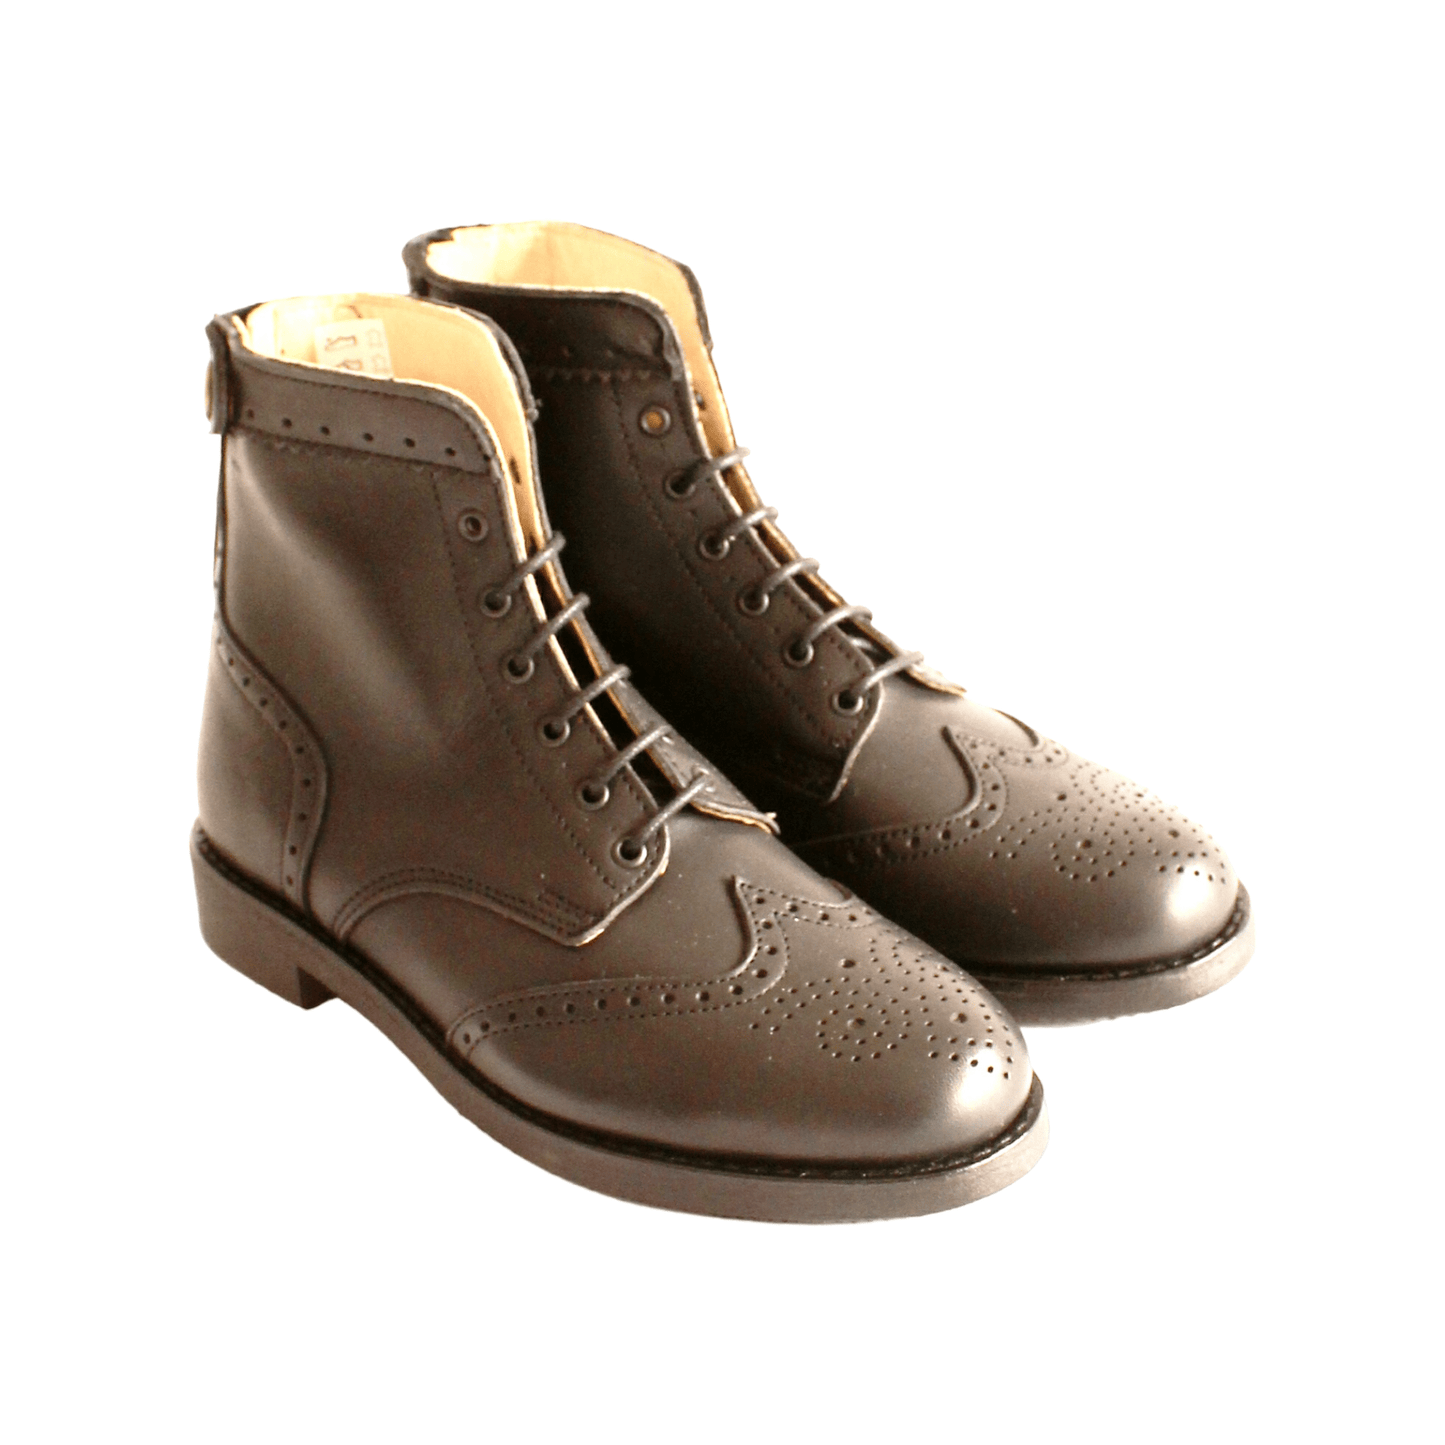 Guadiana Black Boots - OldMulla - Boots Store, Handmade By George Family